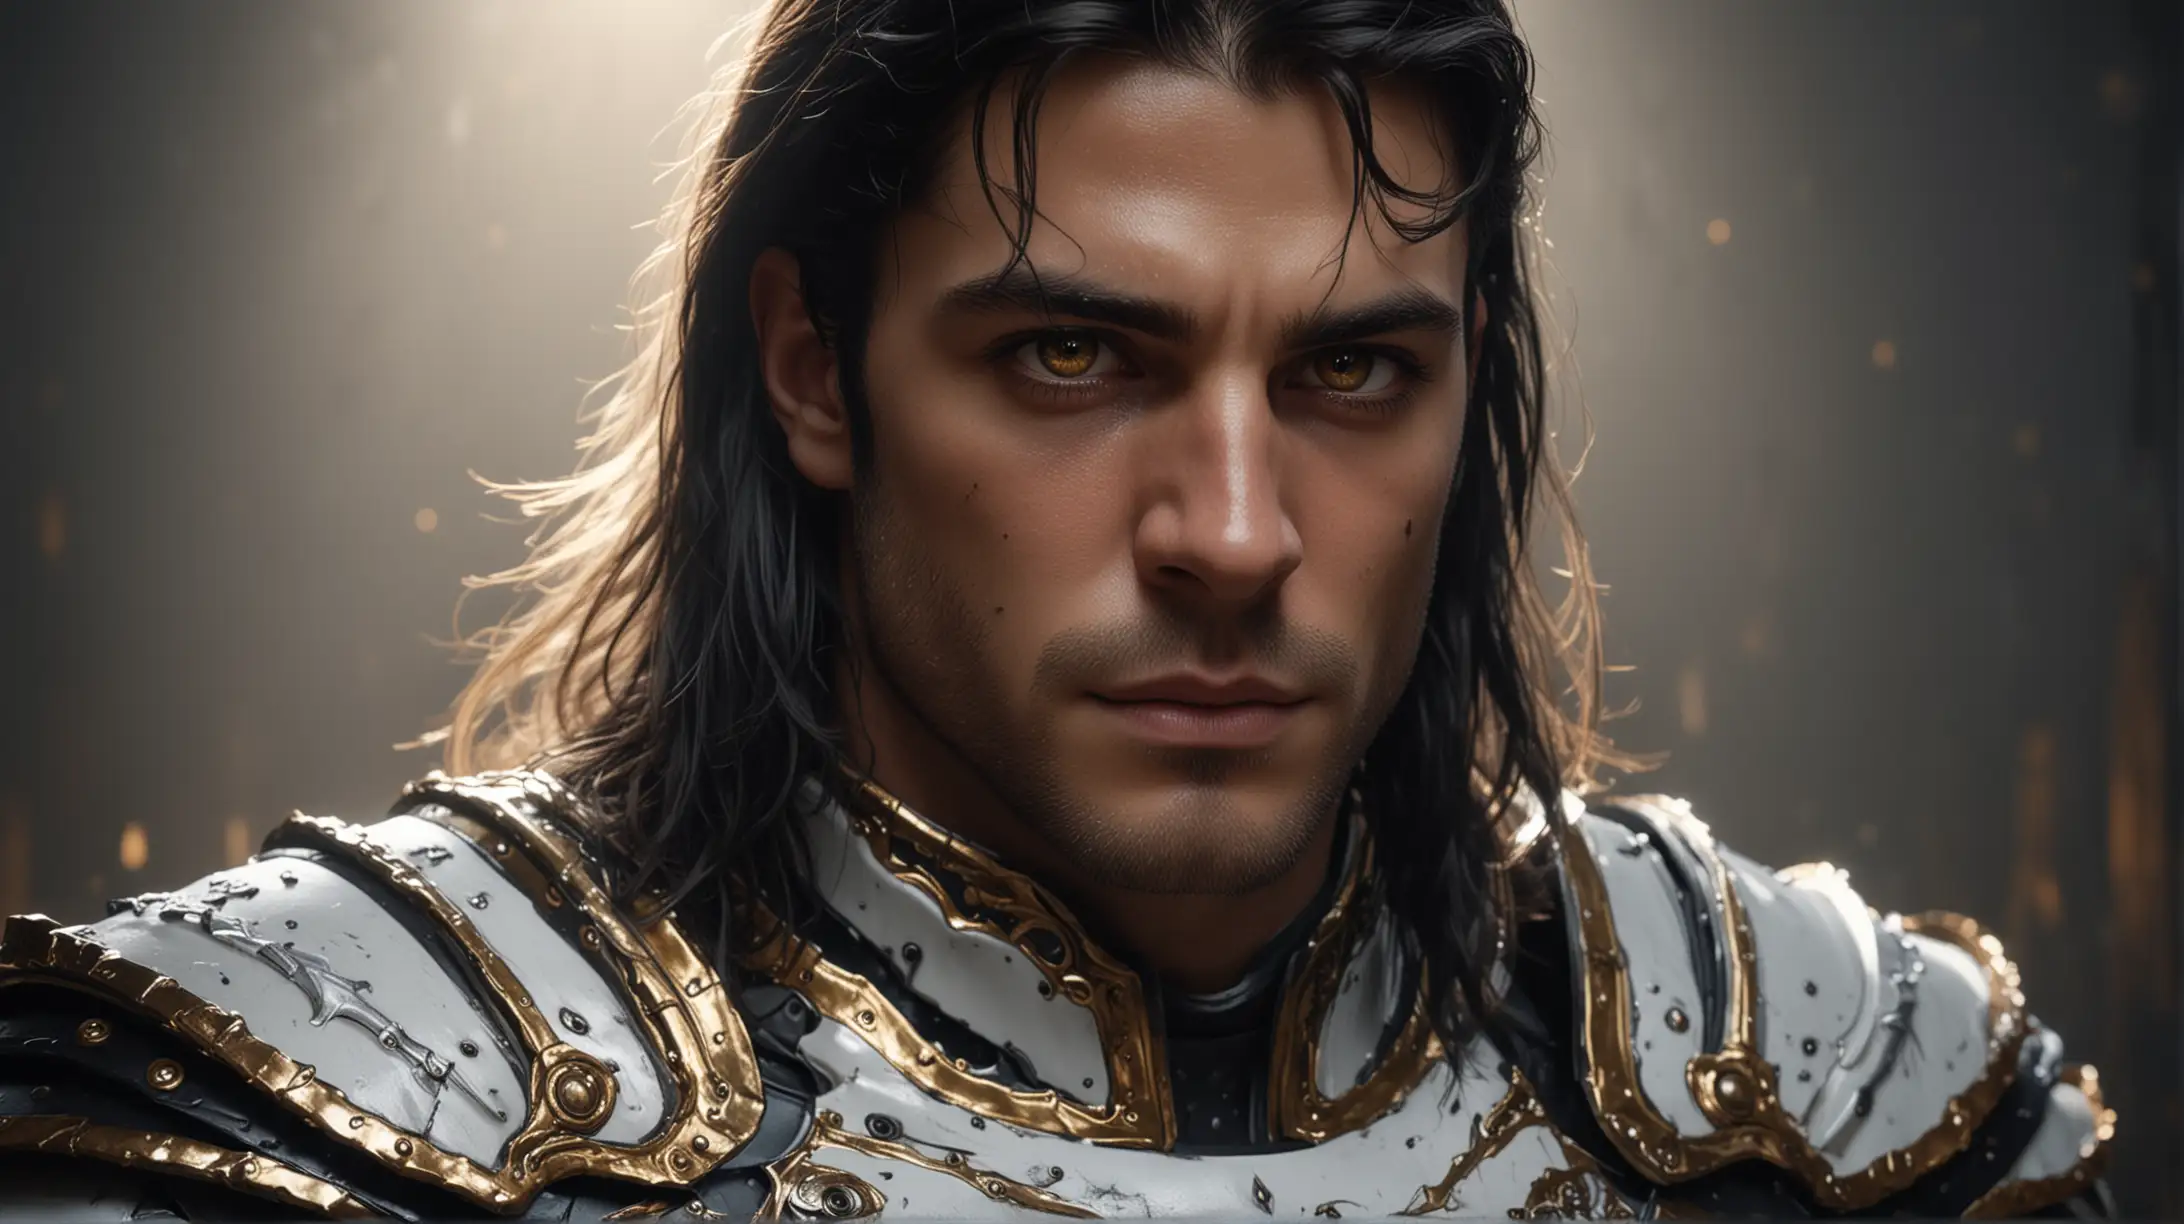 Muscular Man in White and Black Armor with Gold Glowing Eyes